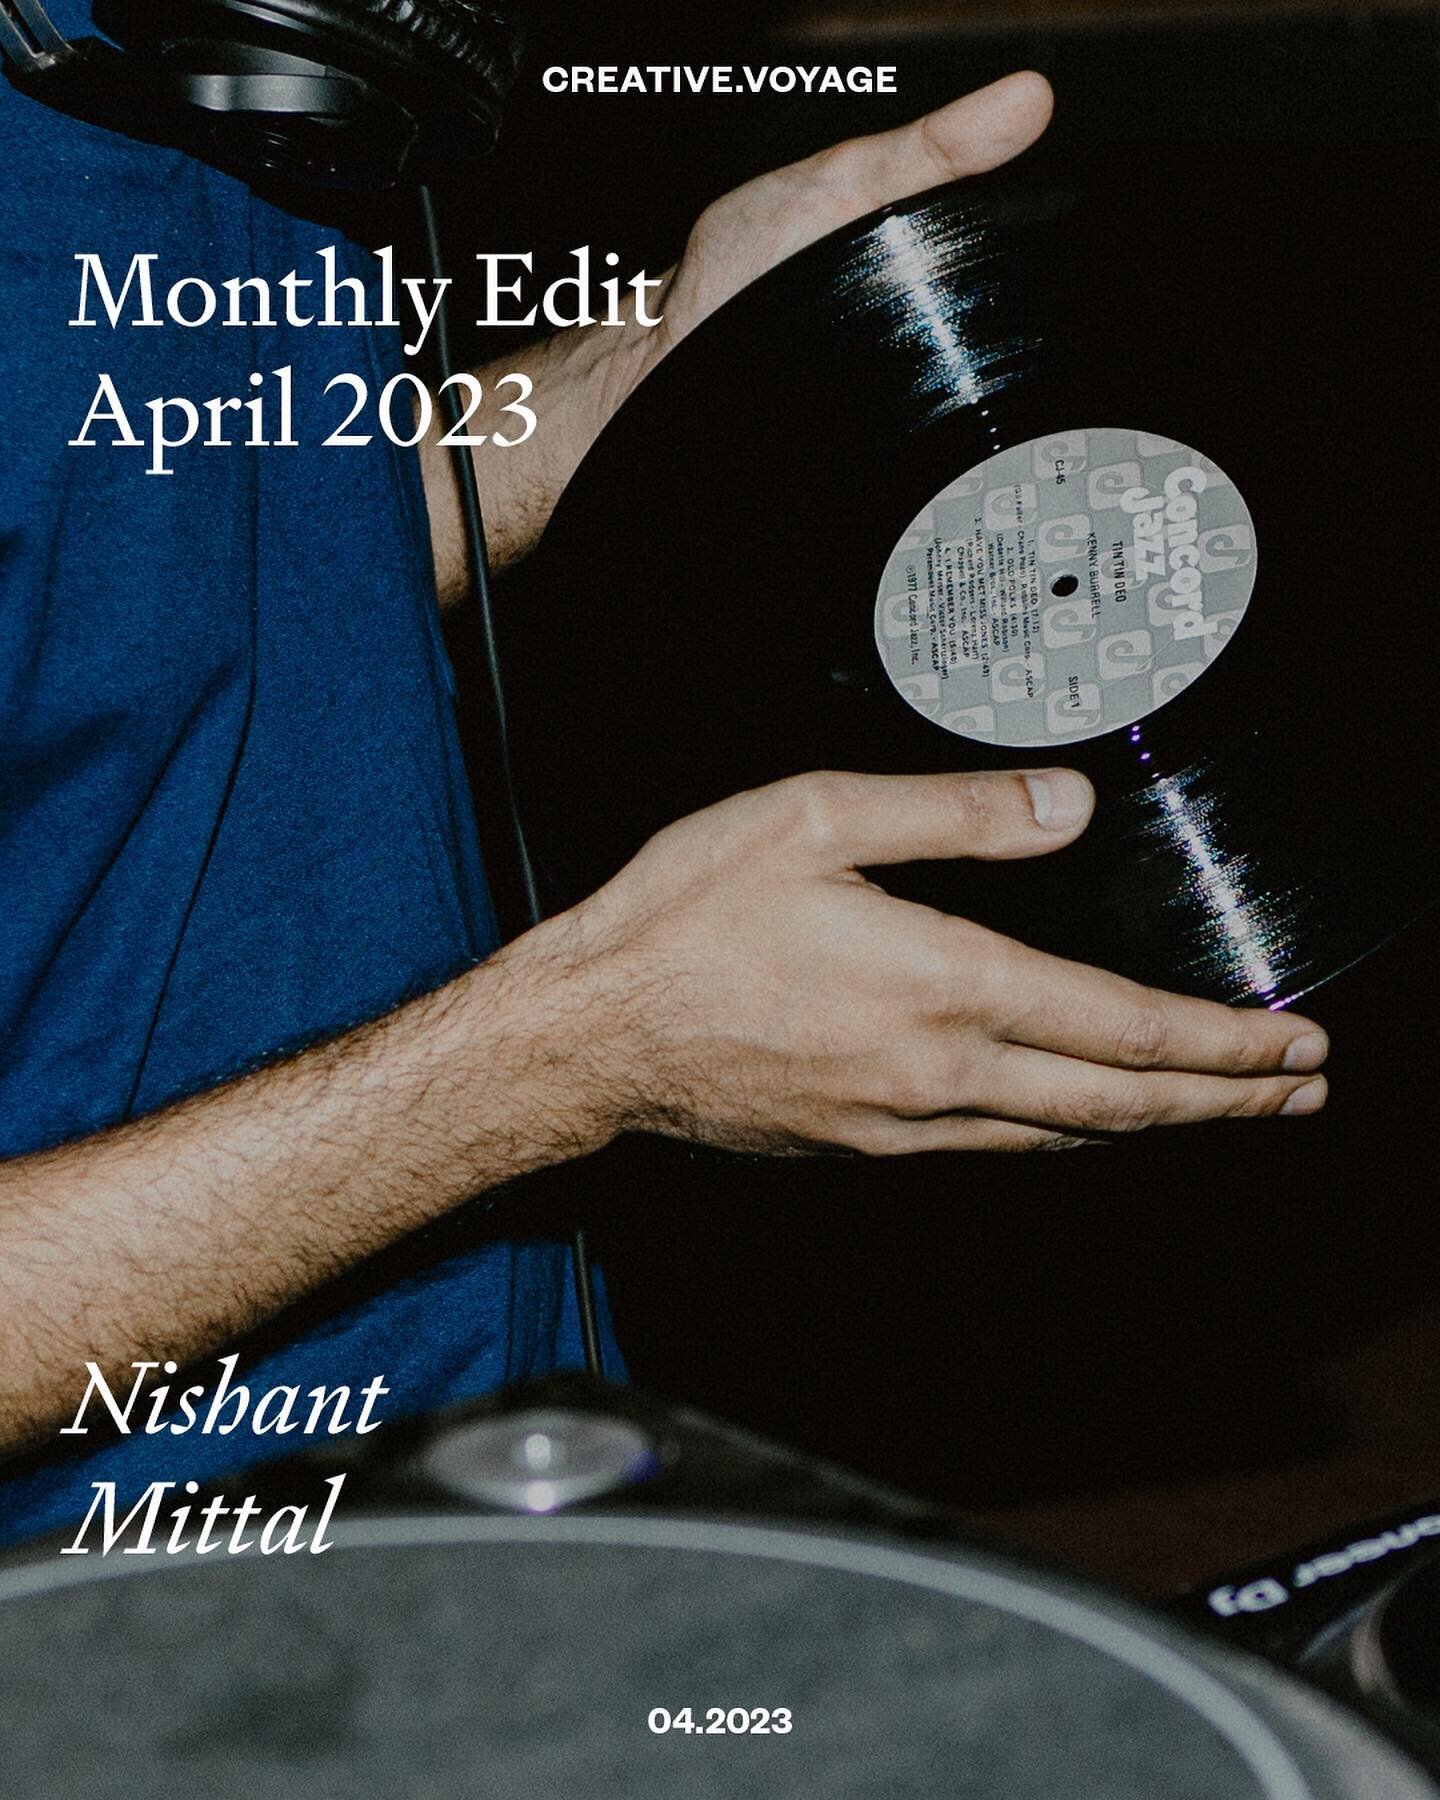 April's Monthly Edit is curated by Nishant Mittal @digginginindia, a record collector, archivist and selector from New Delhi, India. The newsletter is coming exclusively to your inbox this Sunday. Join our community of 1400+ creatives&mdash;link in b